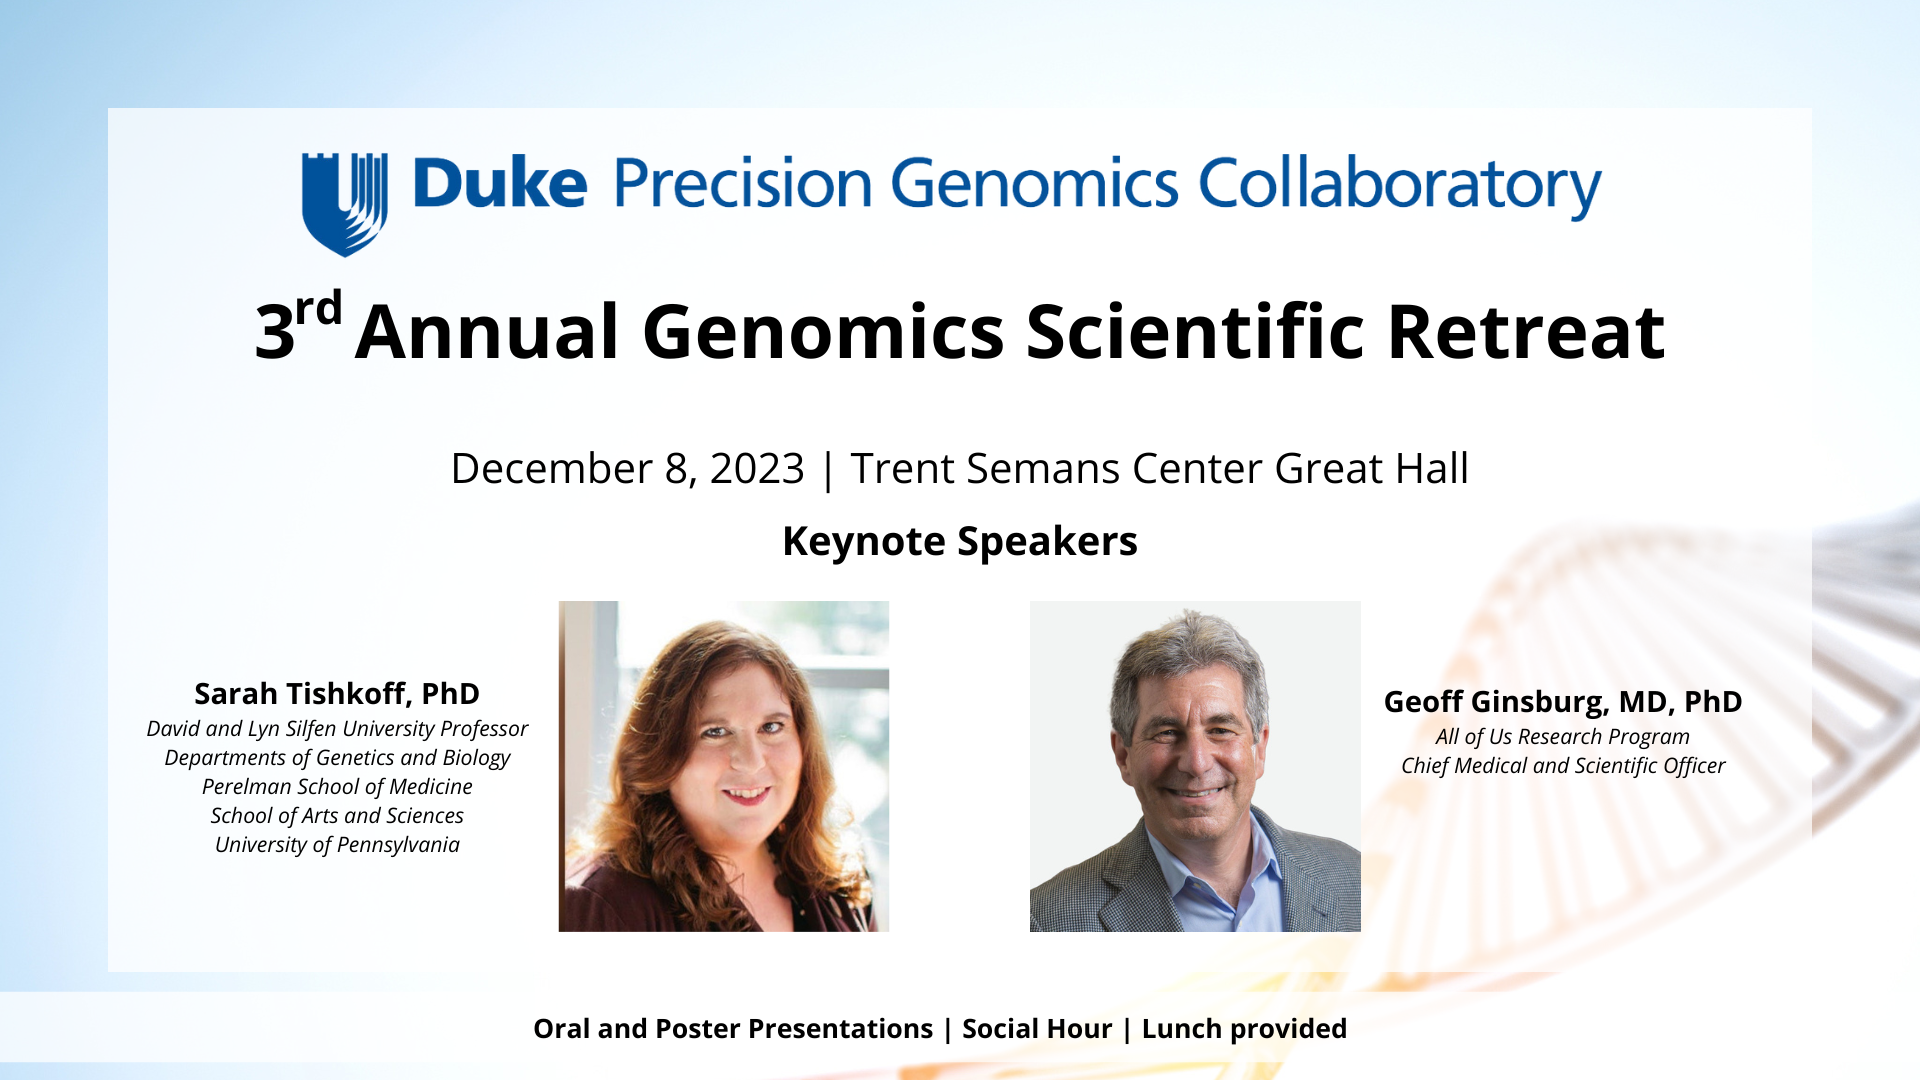 third annual genomics scientific retreat. December 8, 2023 in the trent semans center great hall with kenote speakers Sarah Tishkoff and Geoff Ginsburg